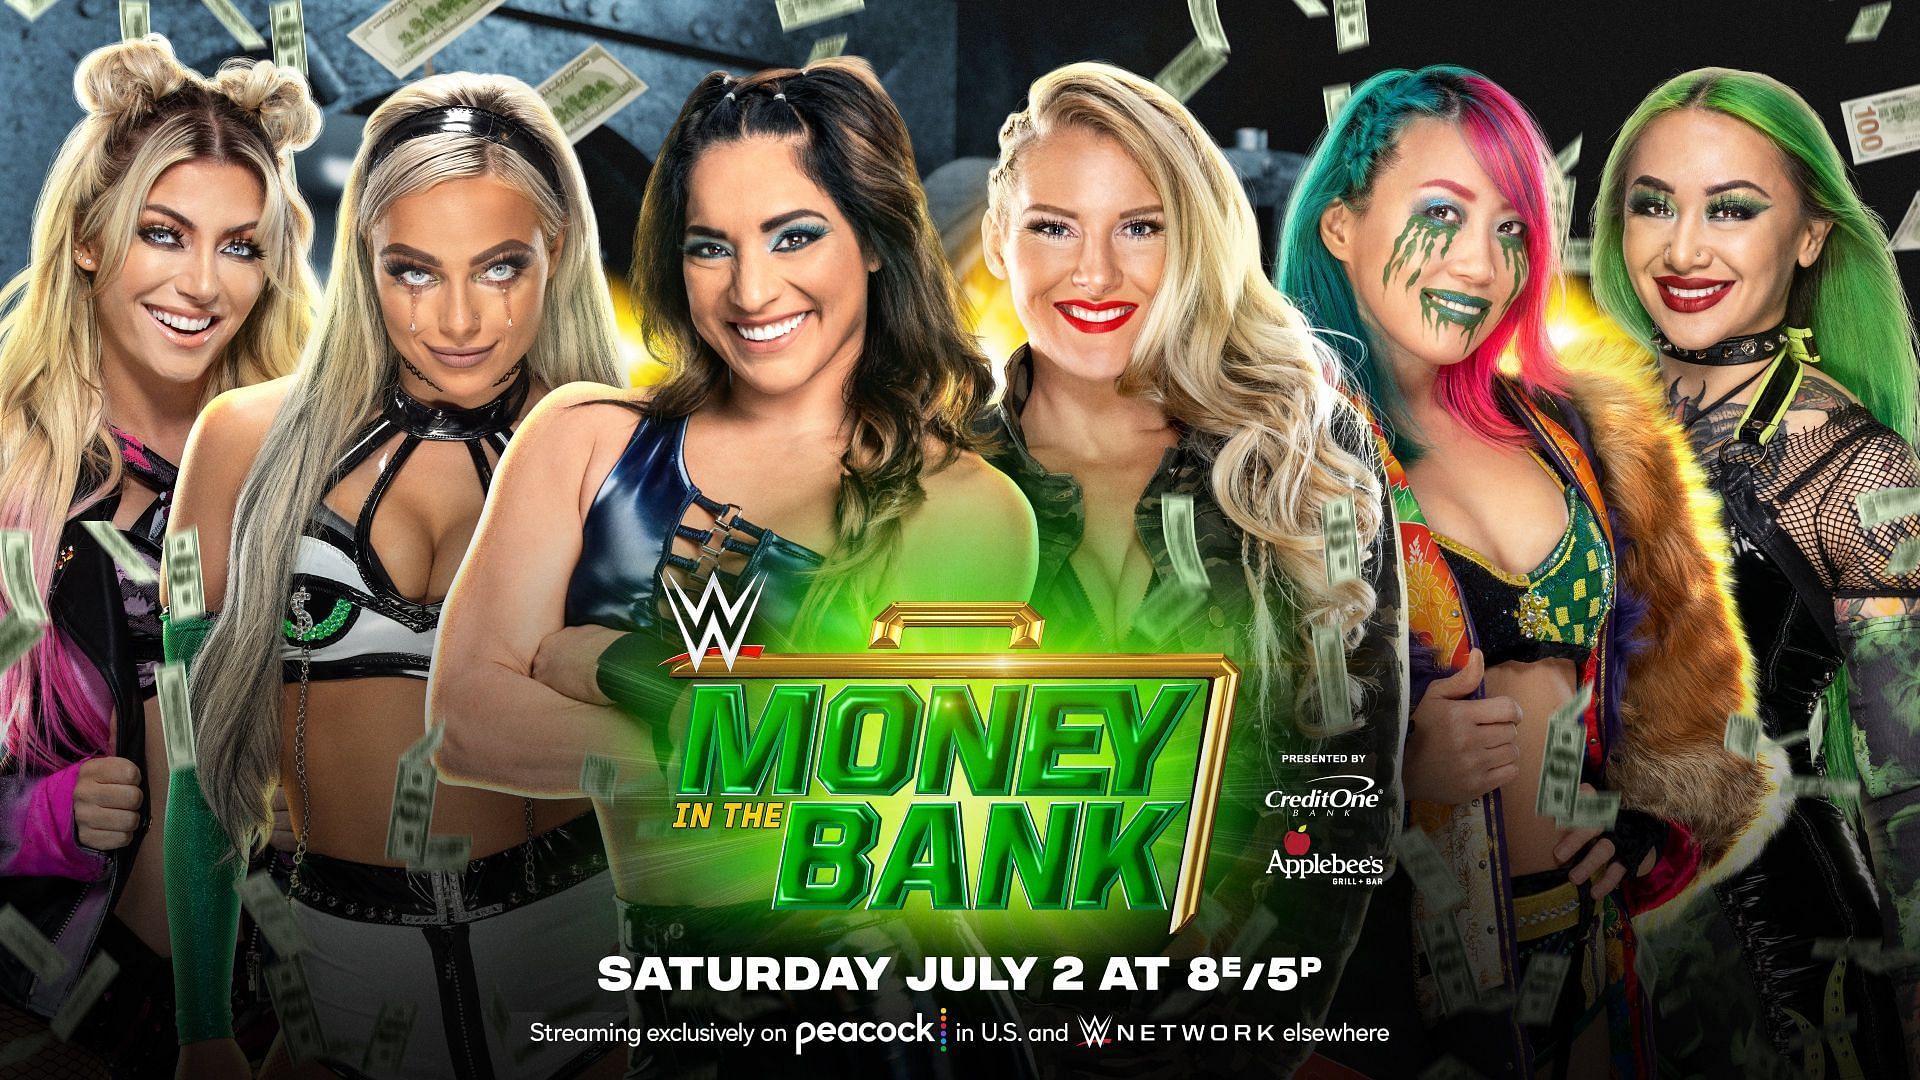 The field for Money in the Bank